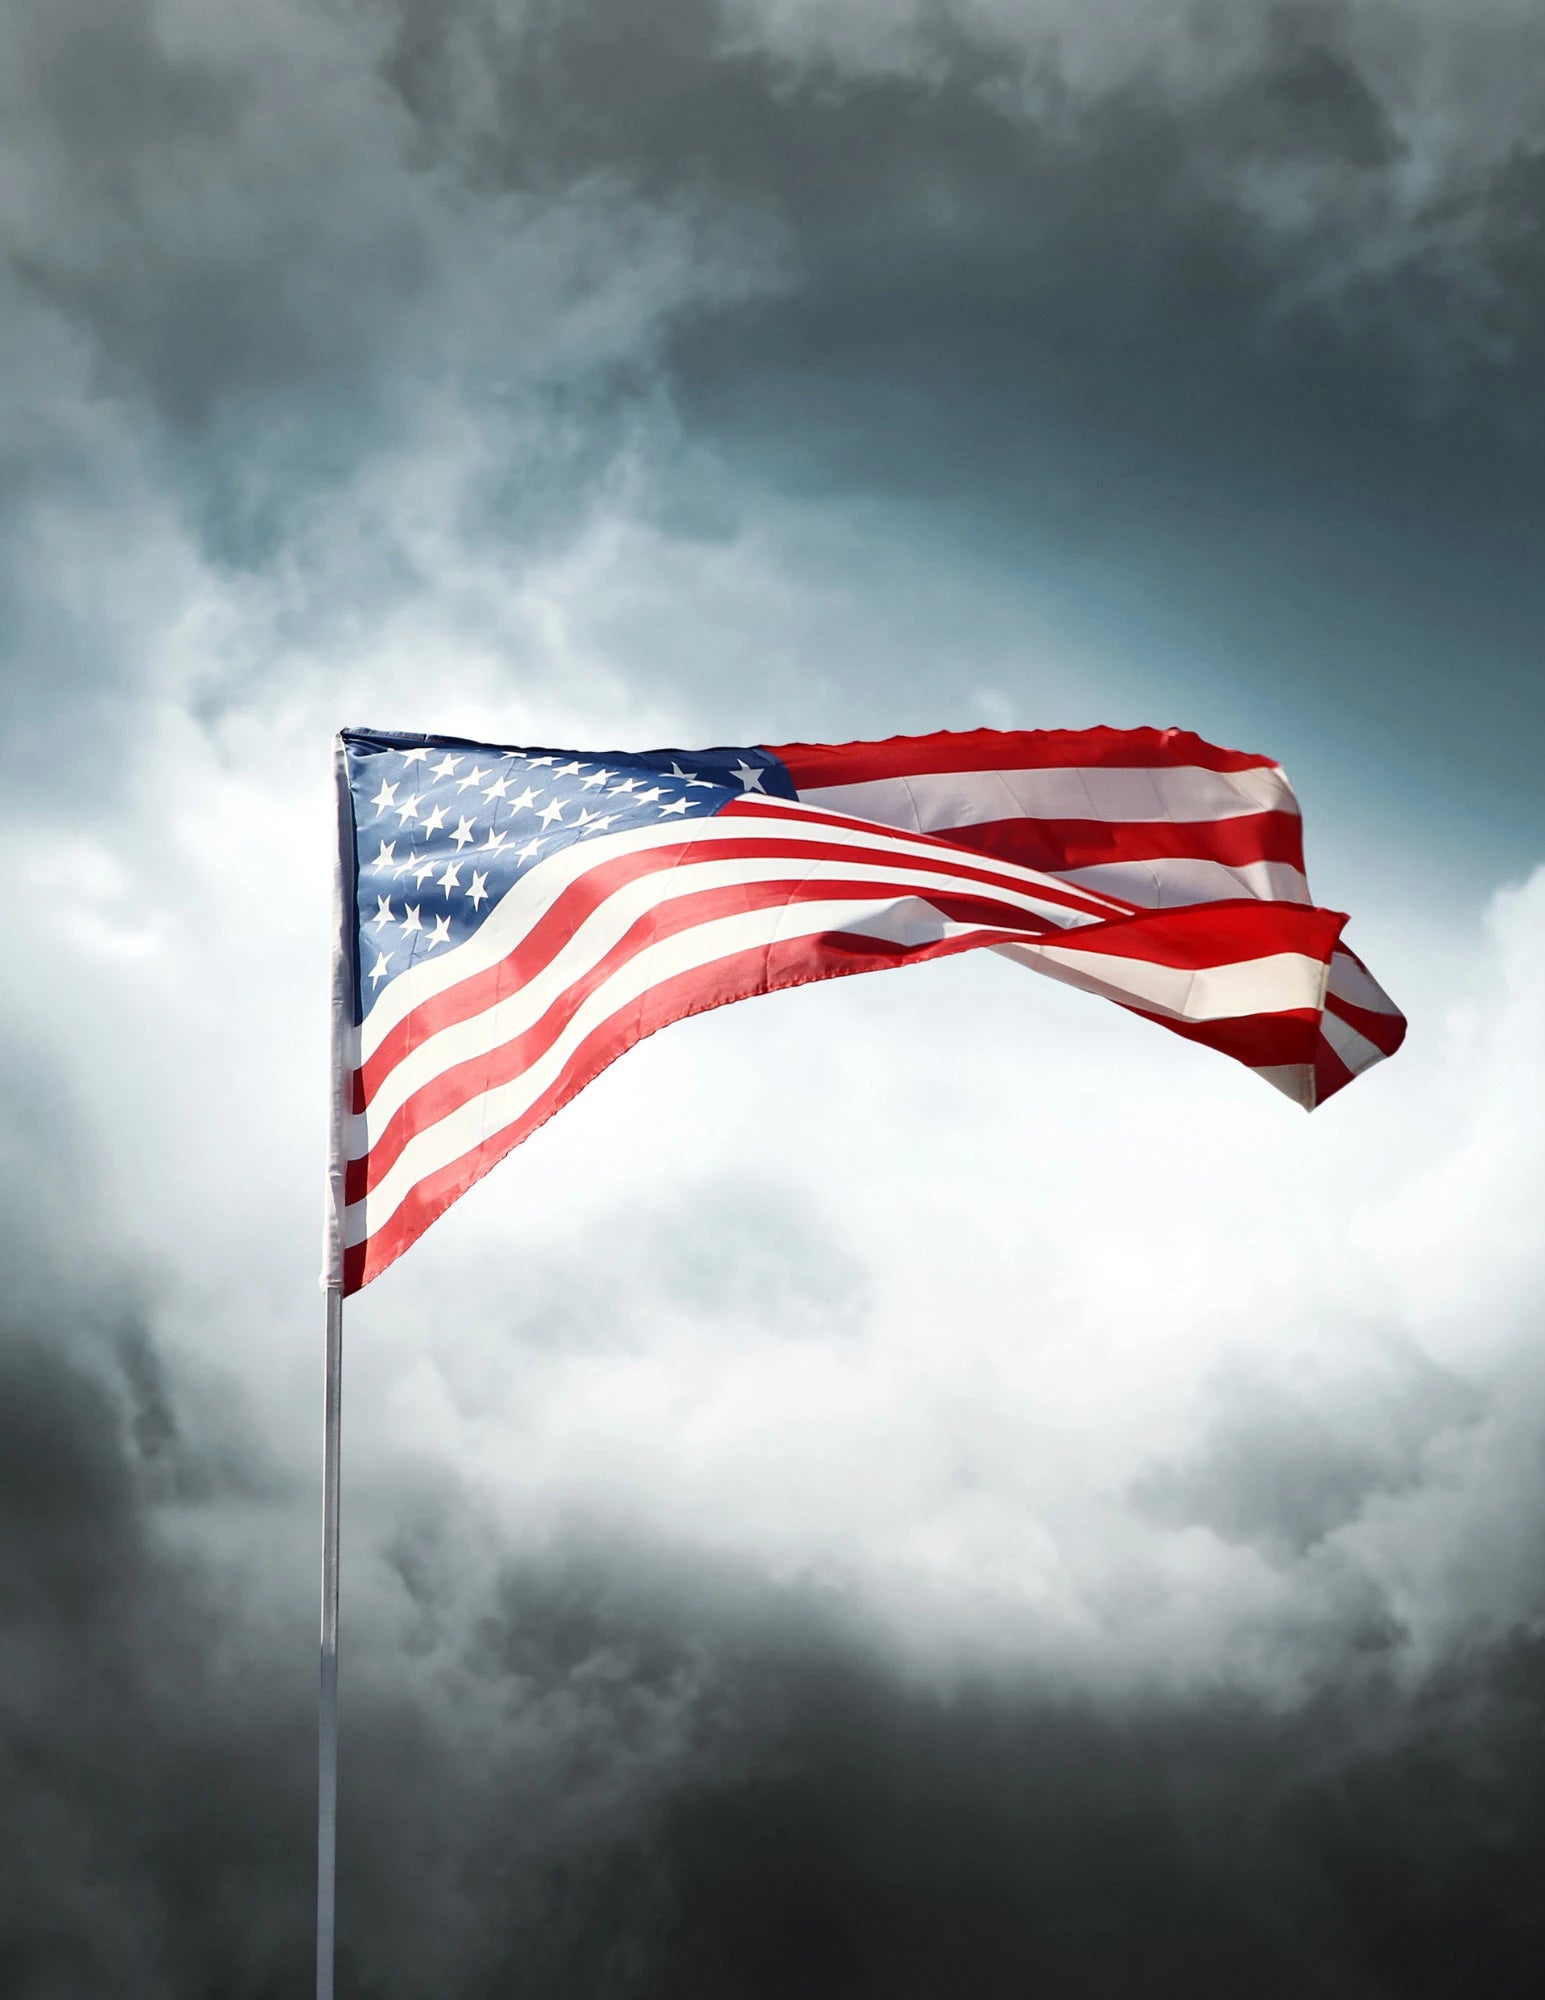 Advice for Flagpole Safety During Storms